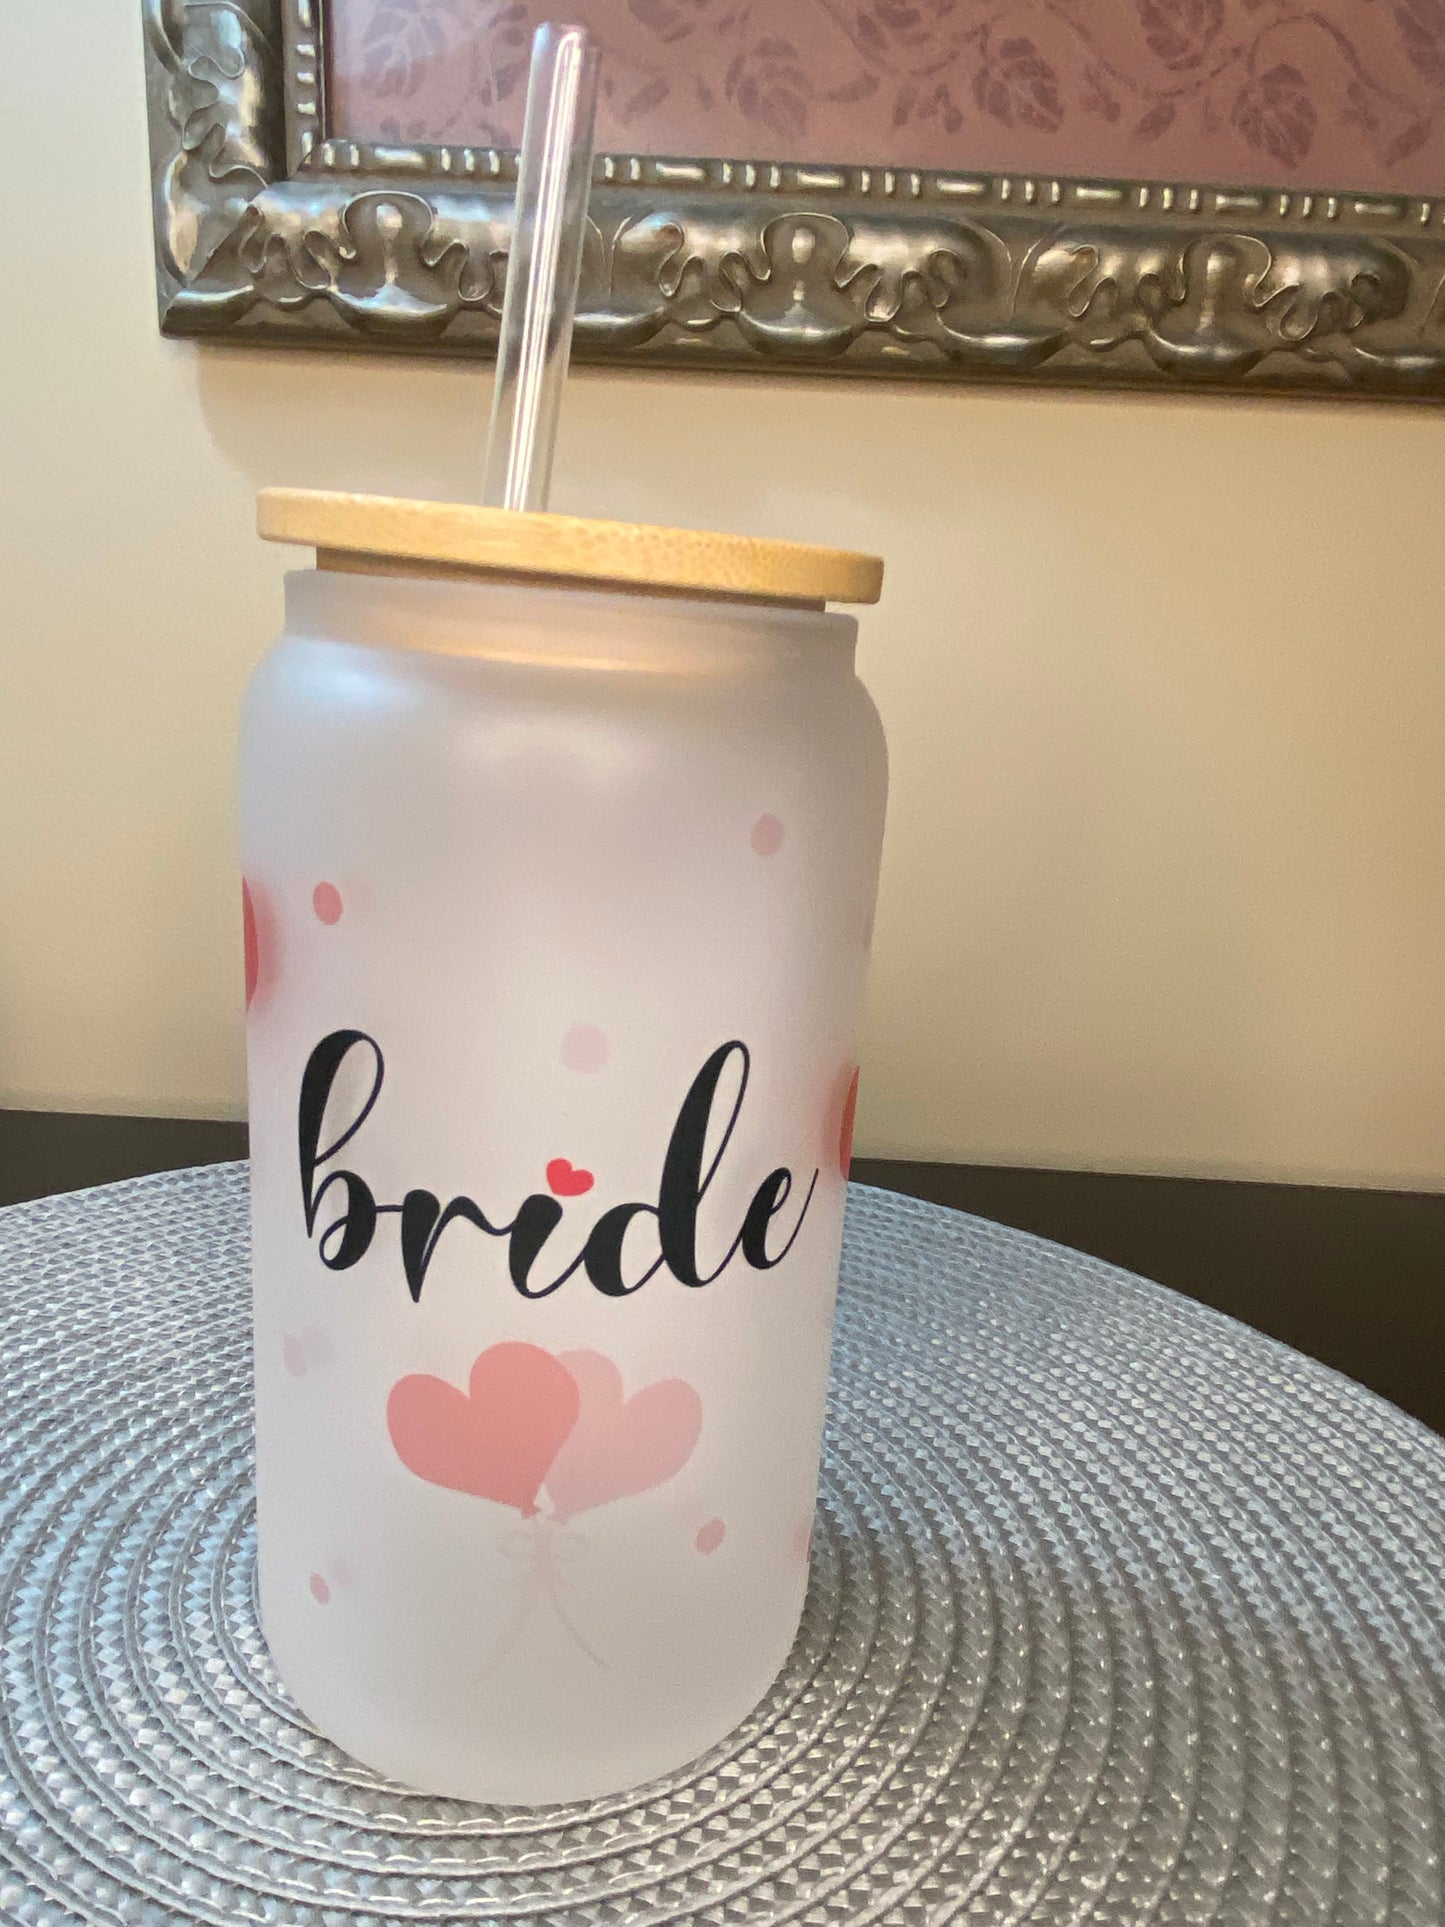 Cheers to the Bride! Raise a Toast with our 16 oz Libbey Style Glass Cup featuring fun Bride Design